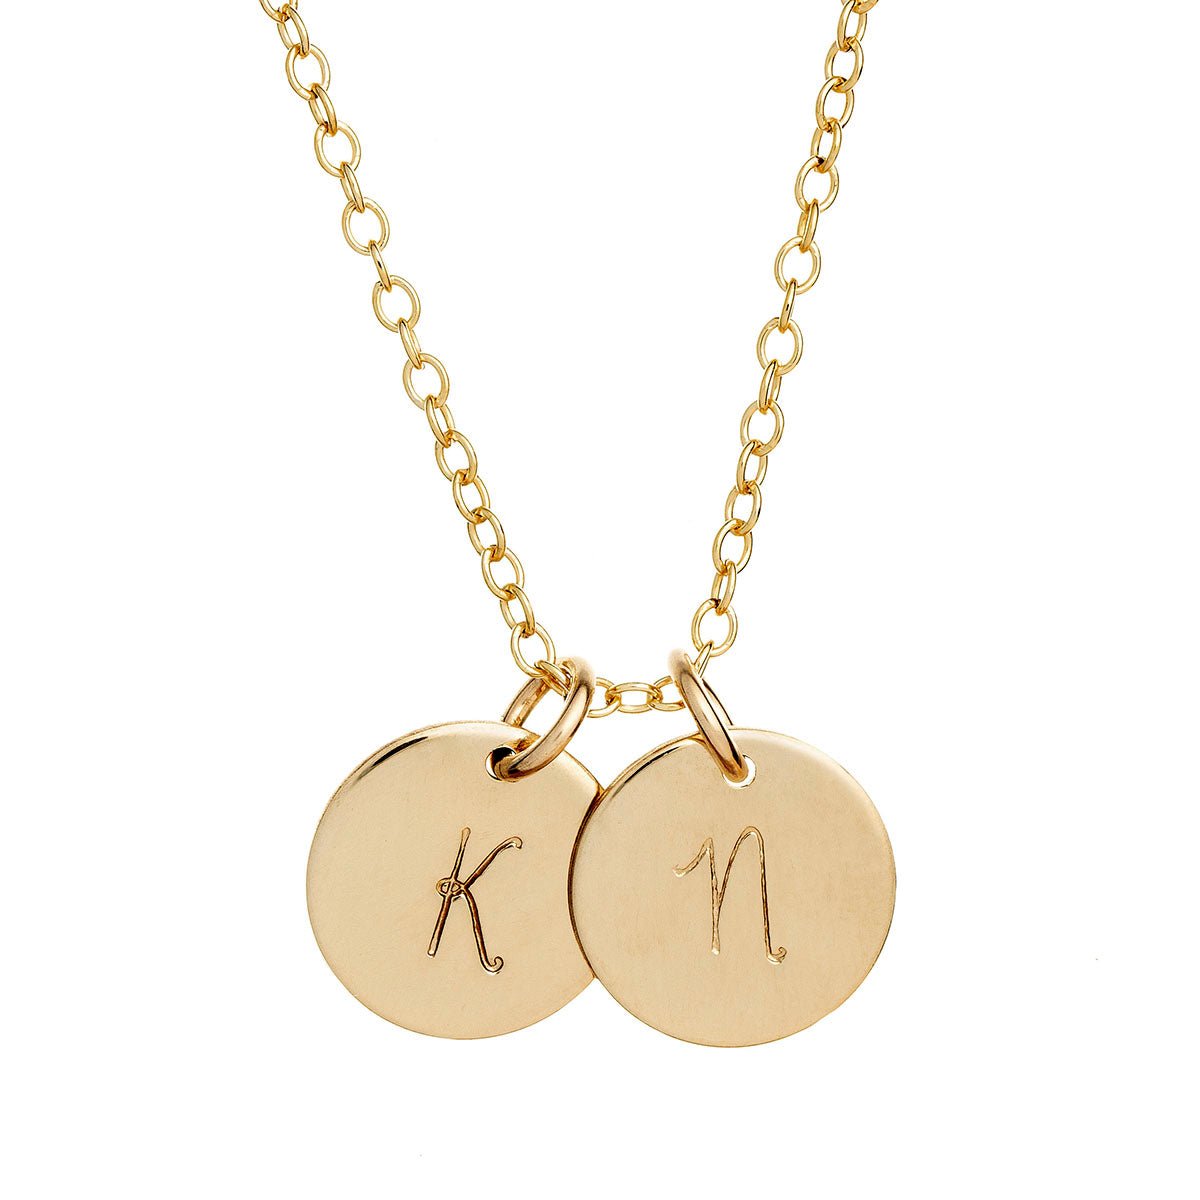 Buy Multiple Initial Necklace 1 2 3 4 5 6 7 8 9 10 Initials Sterling Silver  14K Gold Plated Personalized Mommy Necklace Family Necklace Online in India  - Etsy